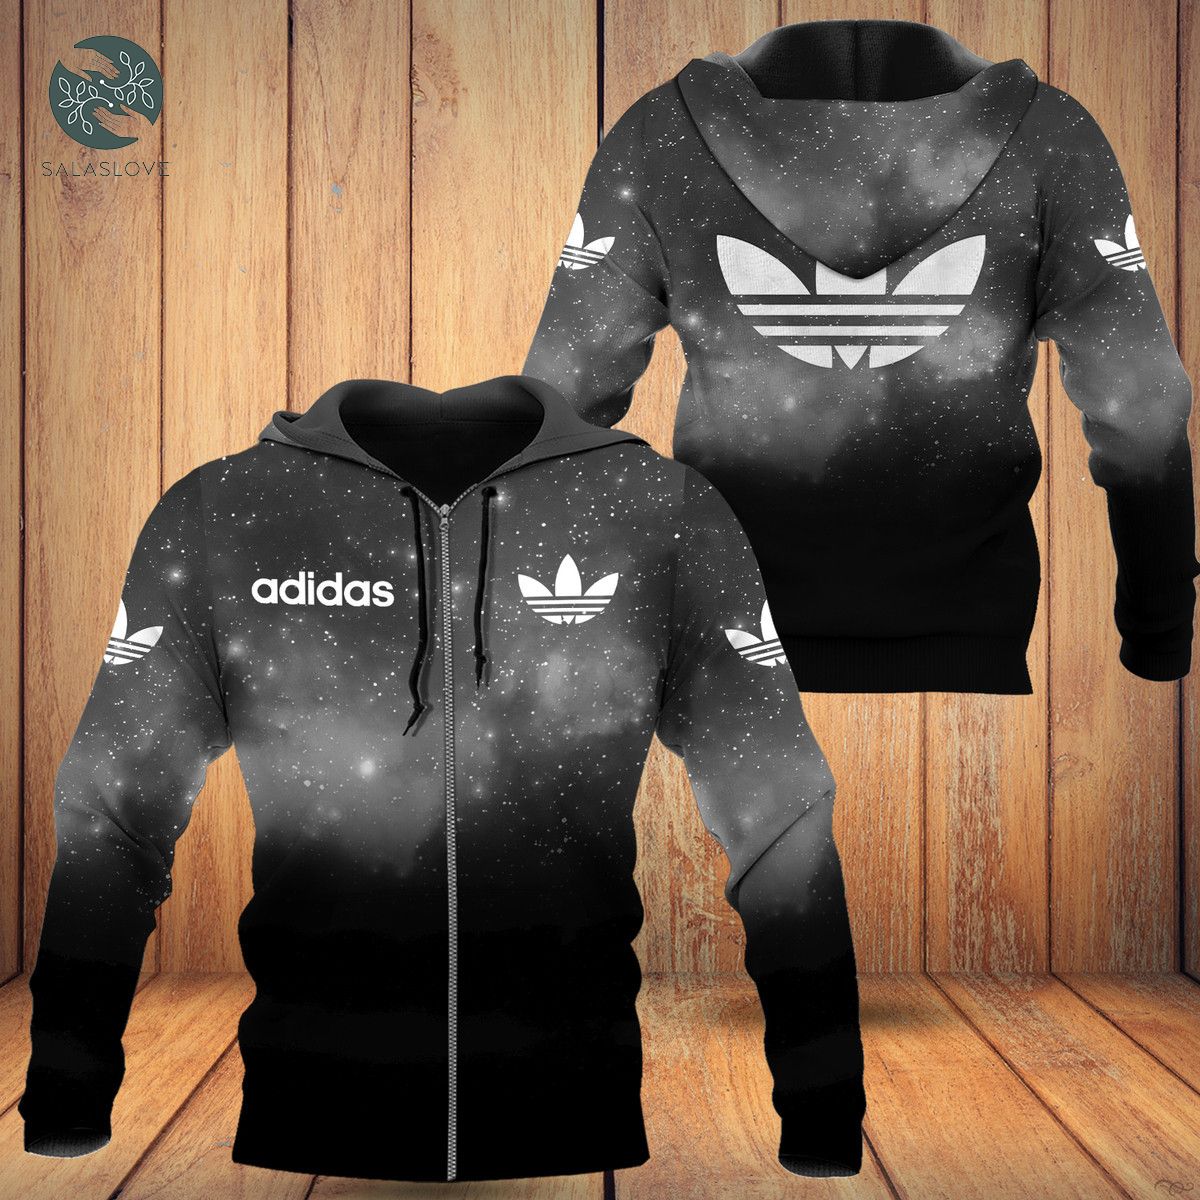 Adidas Limited Unisex Hoodie For Men Women